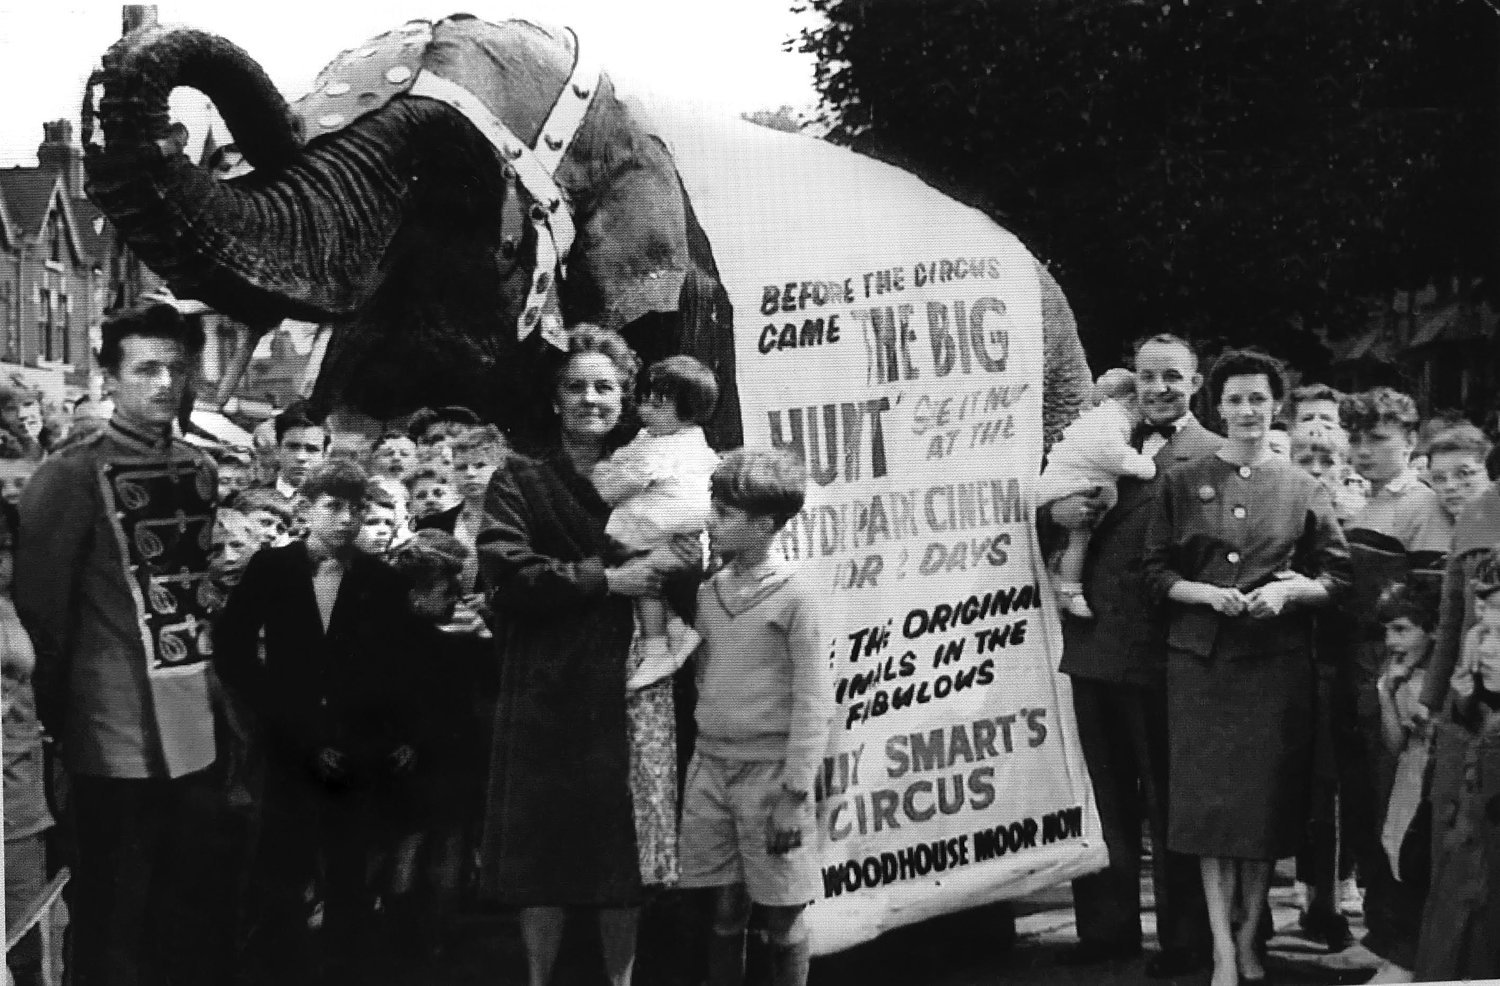 Elephant at Hyde Park Picture House, 1959